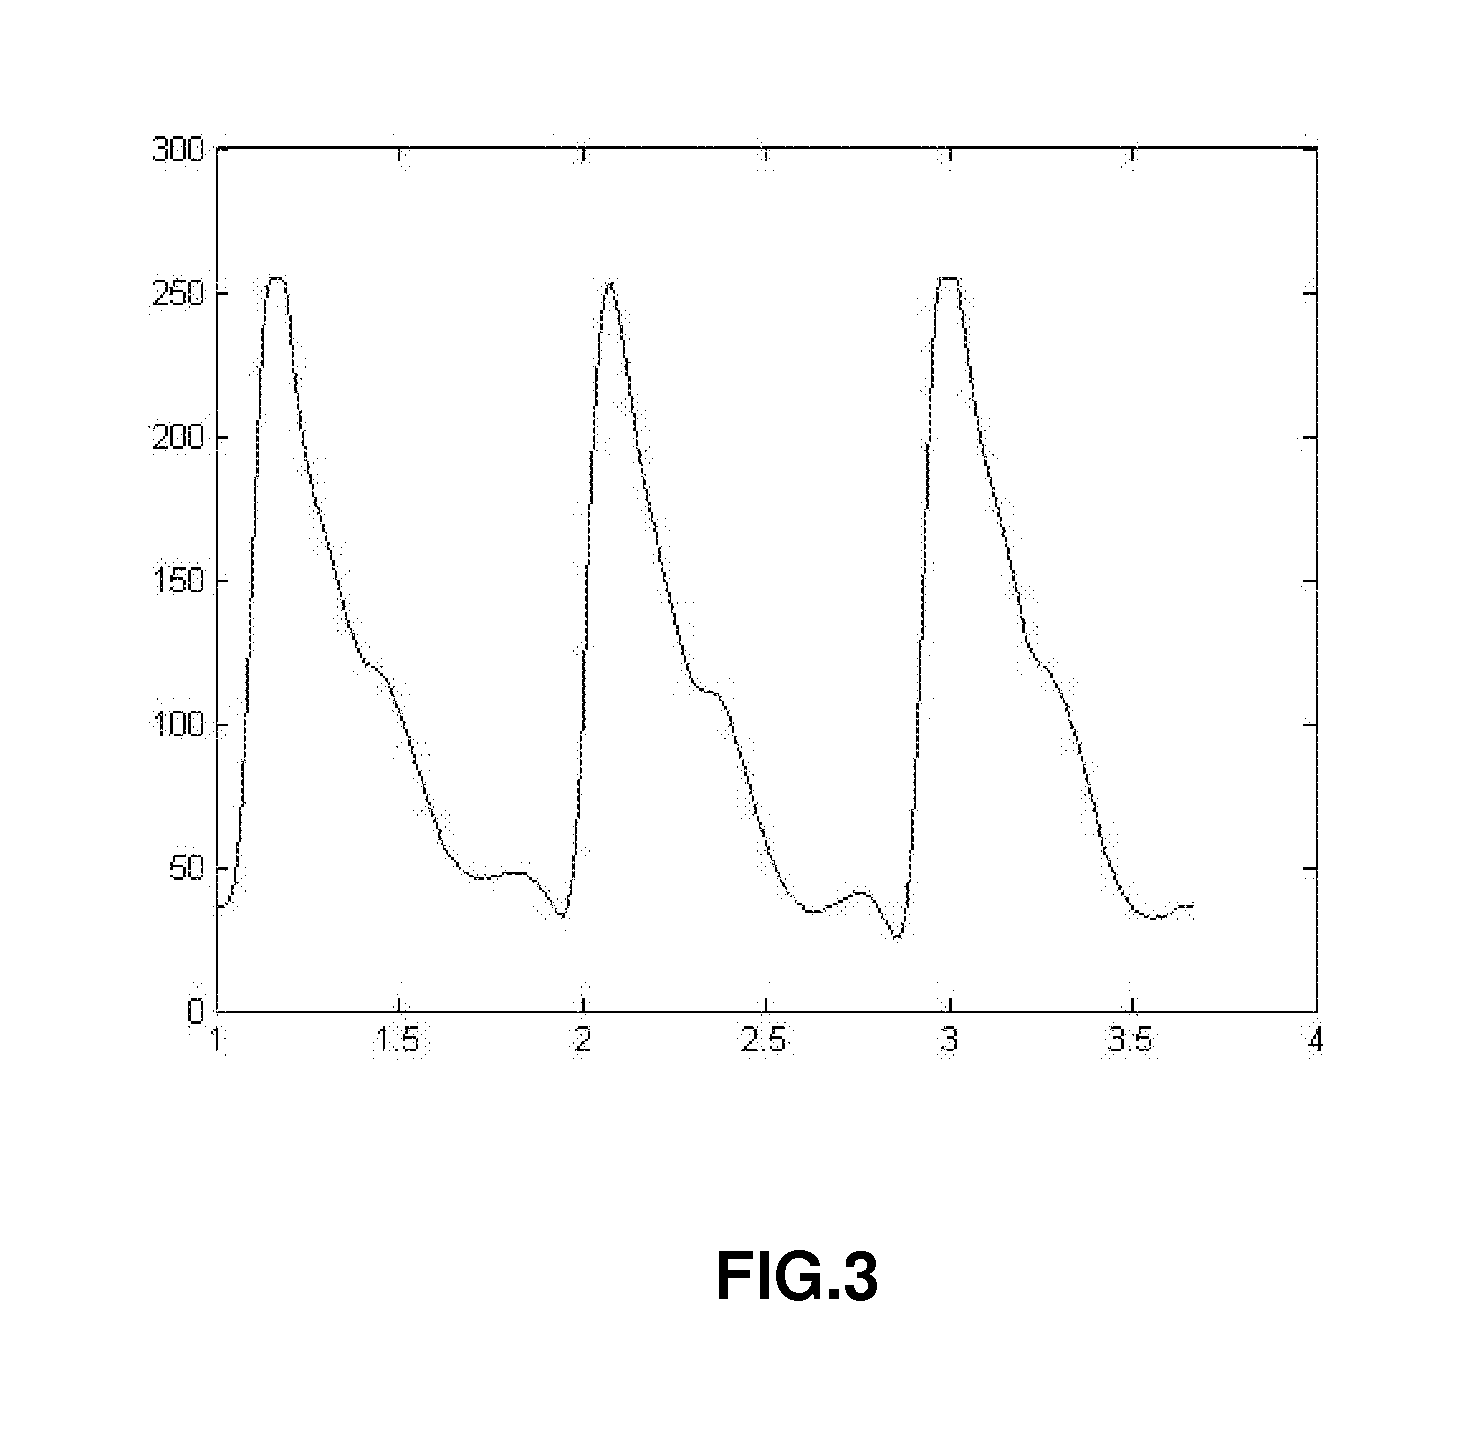 System and apparatus for the non-invasive measurement of glucose levels in blood